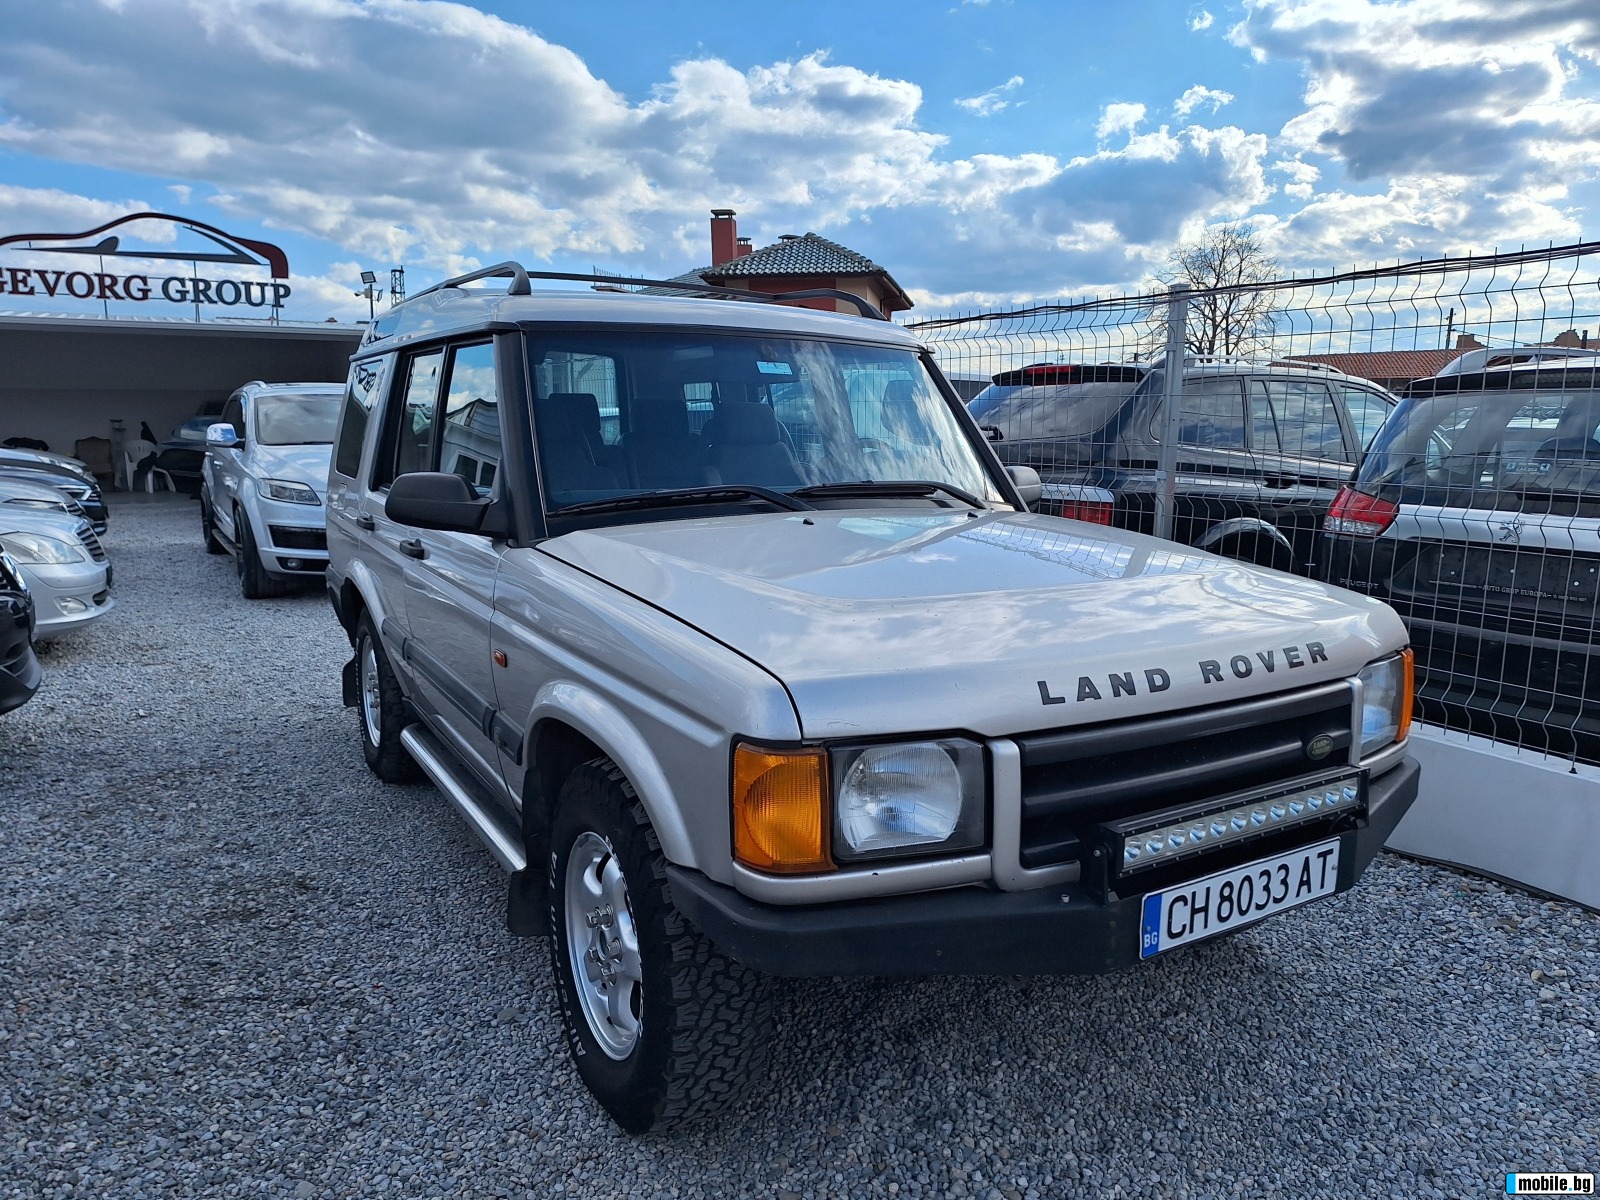 Land Rover Discovery 2.5 TDI    | Mobile.bg   3